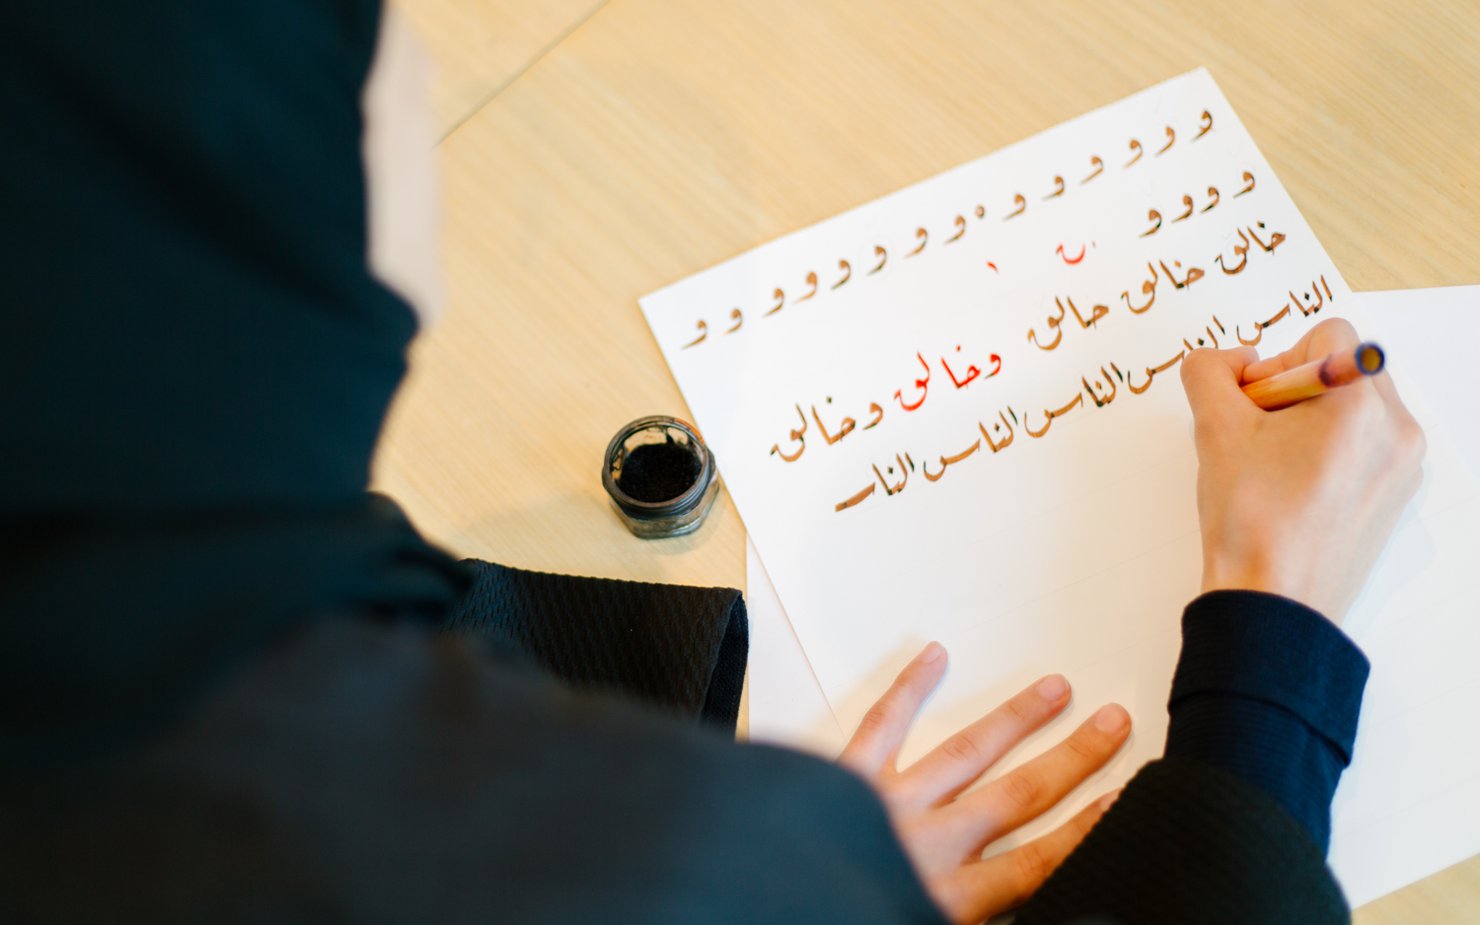 An over-the-shoulder shot of a woman in traditional Qatari clothes writing calligraphic letters on a piece of paper